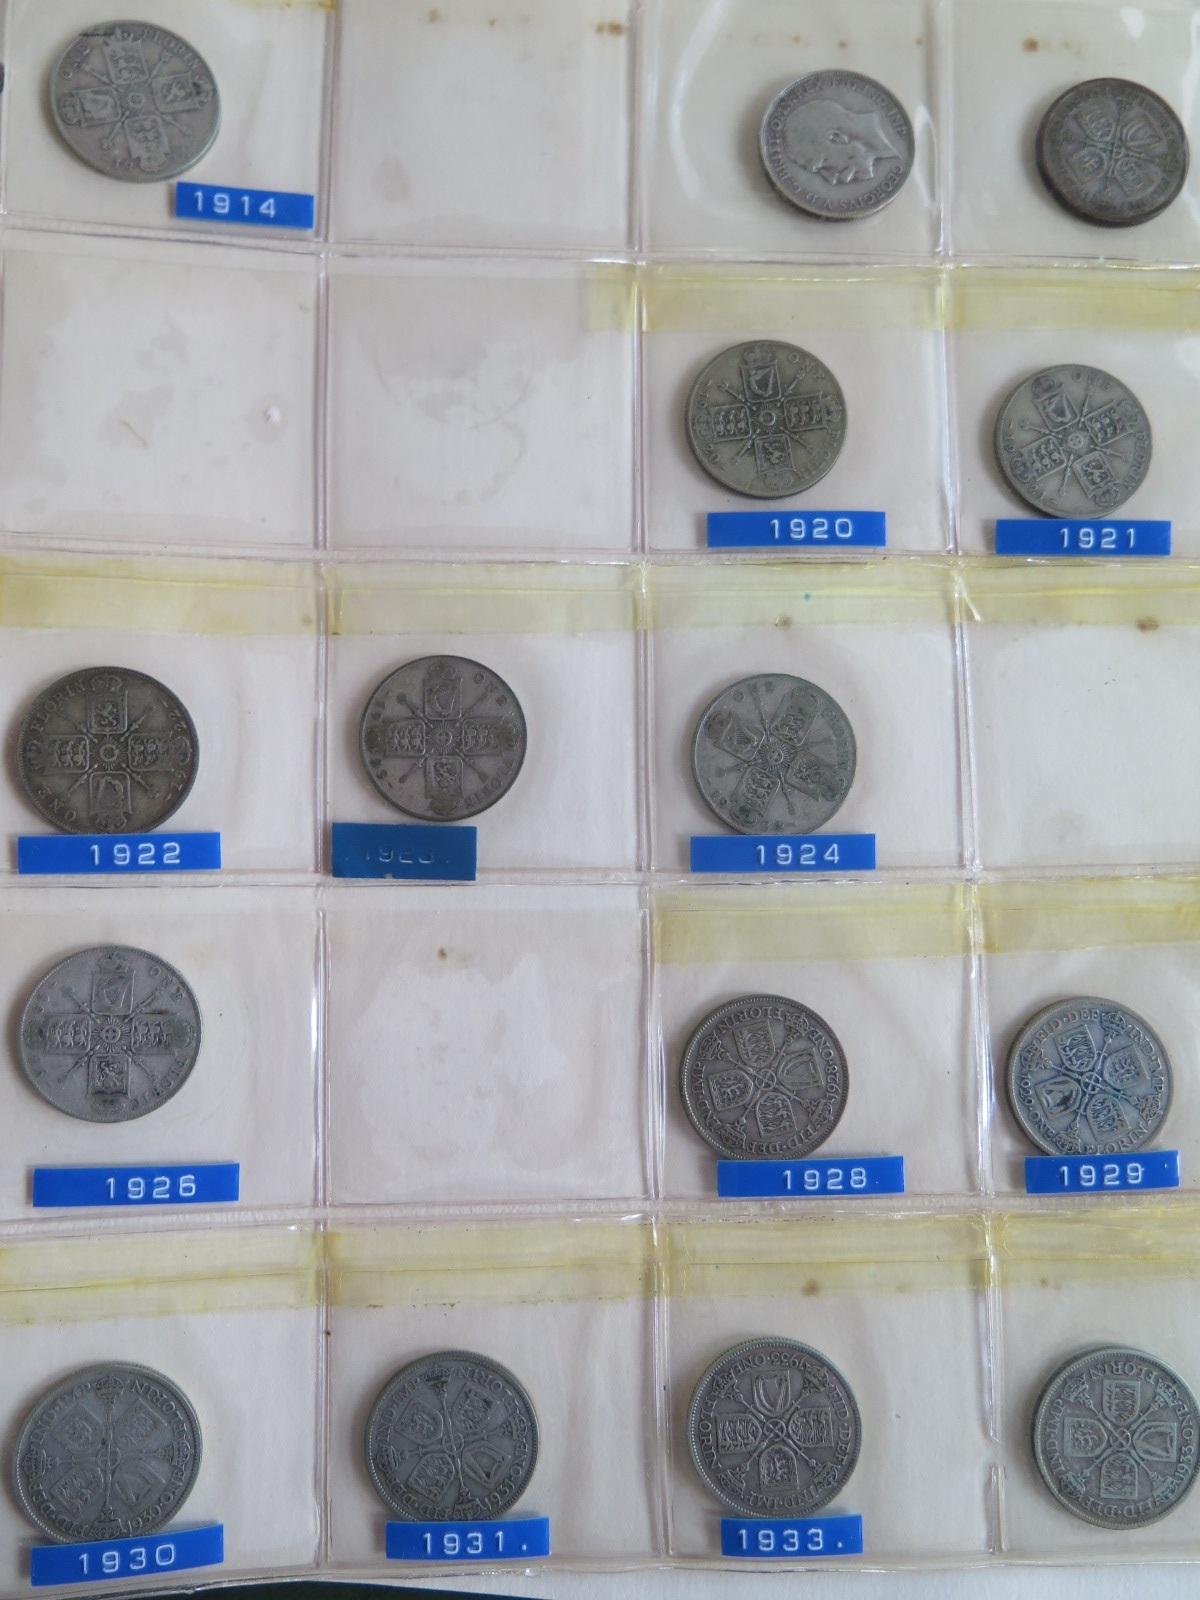 A collection of British coinage including some pre 1946, US coins and commemorative coins, with - Image 2 of 4